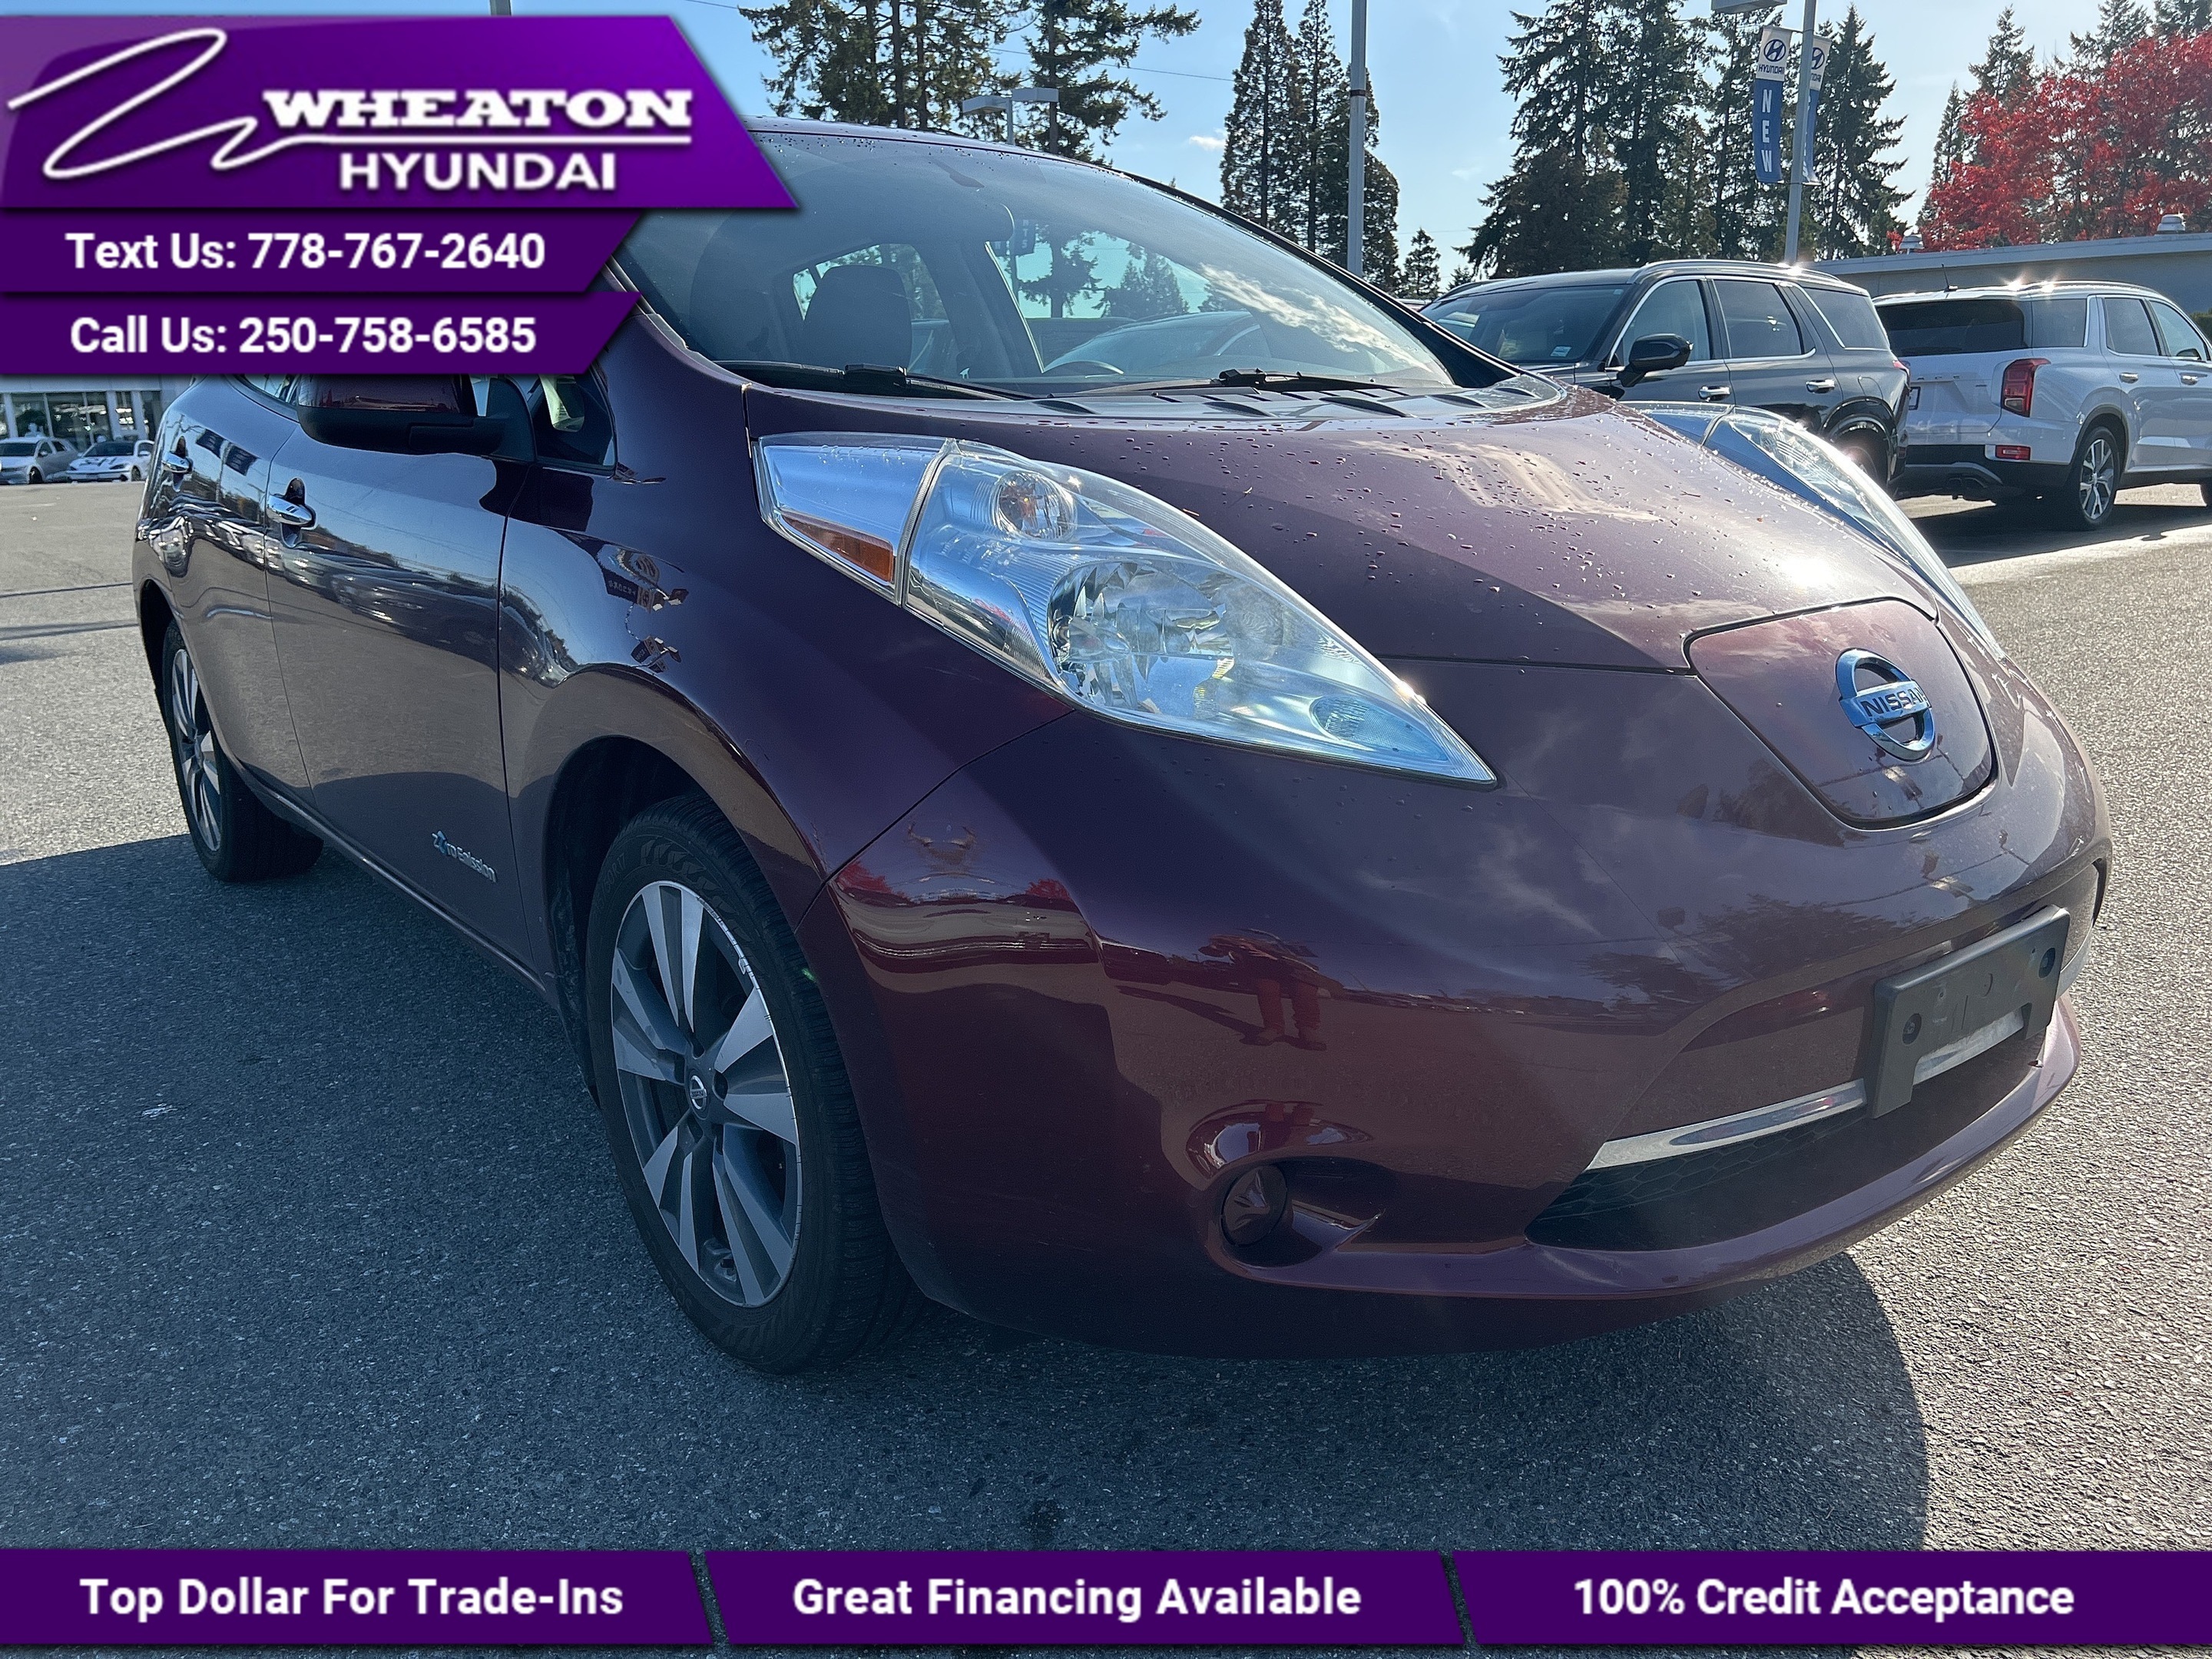 2017 Nissan LEAF SV, Trade in, Navigation, Heated Seats, Touch Scre